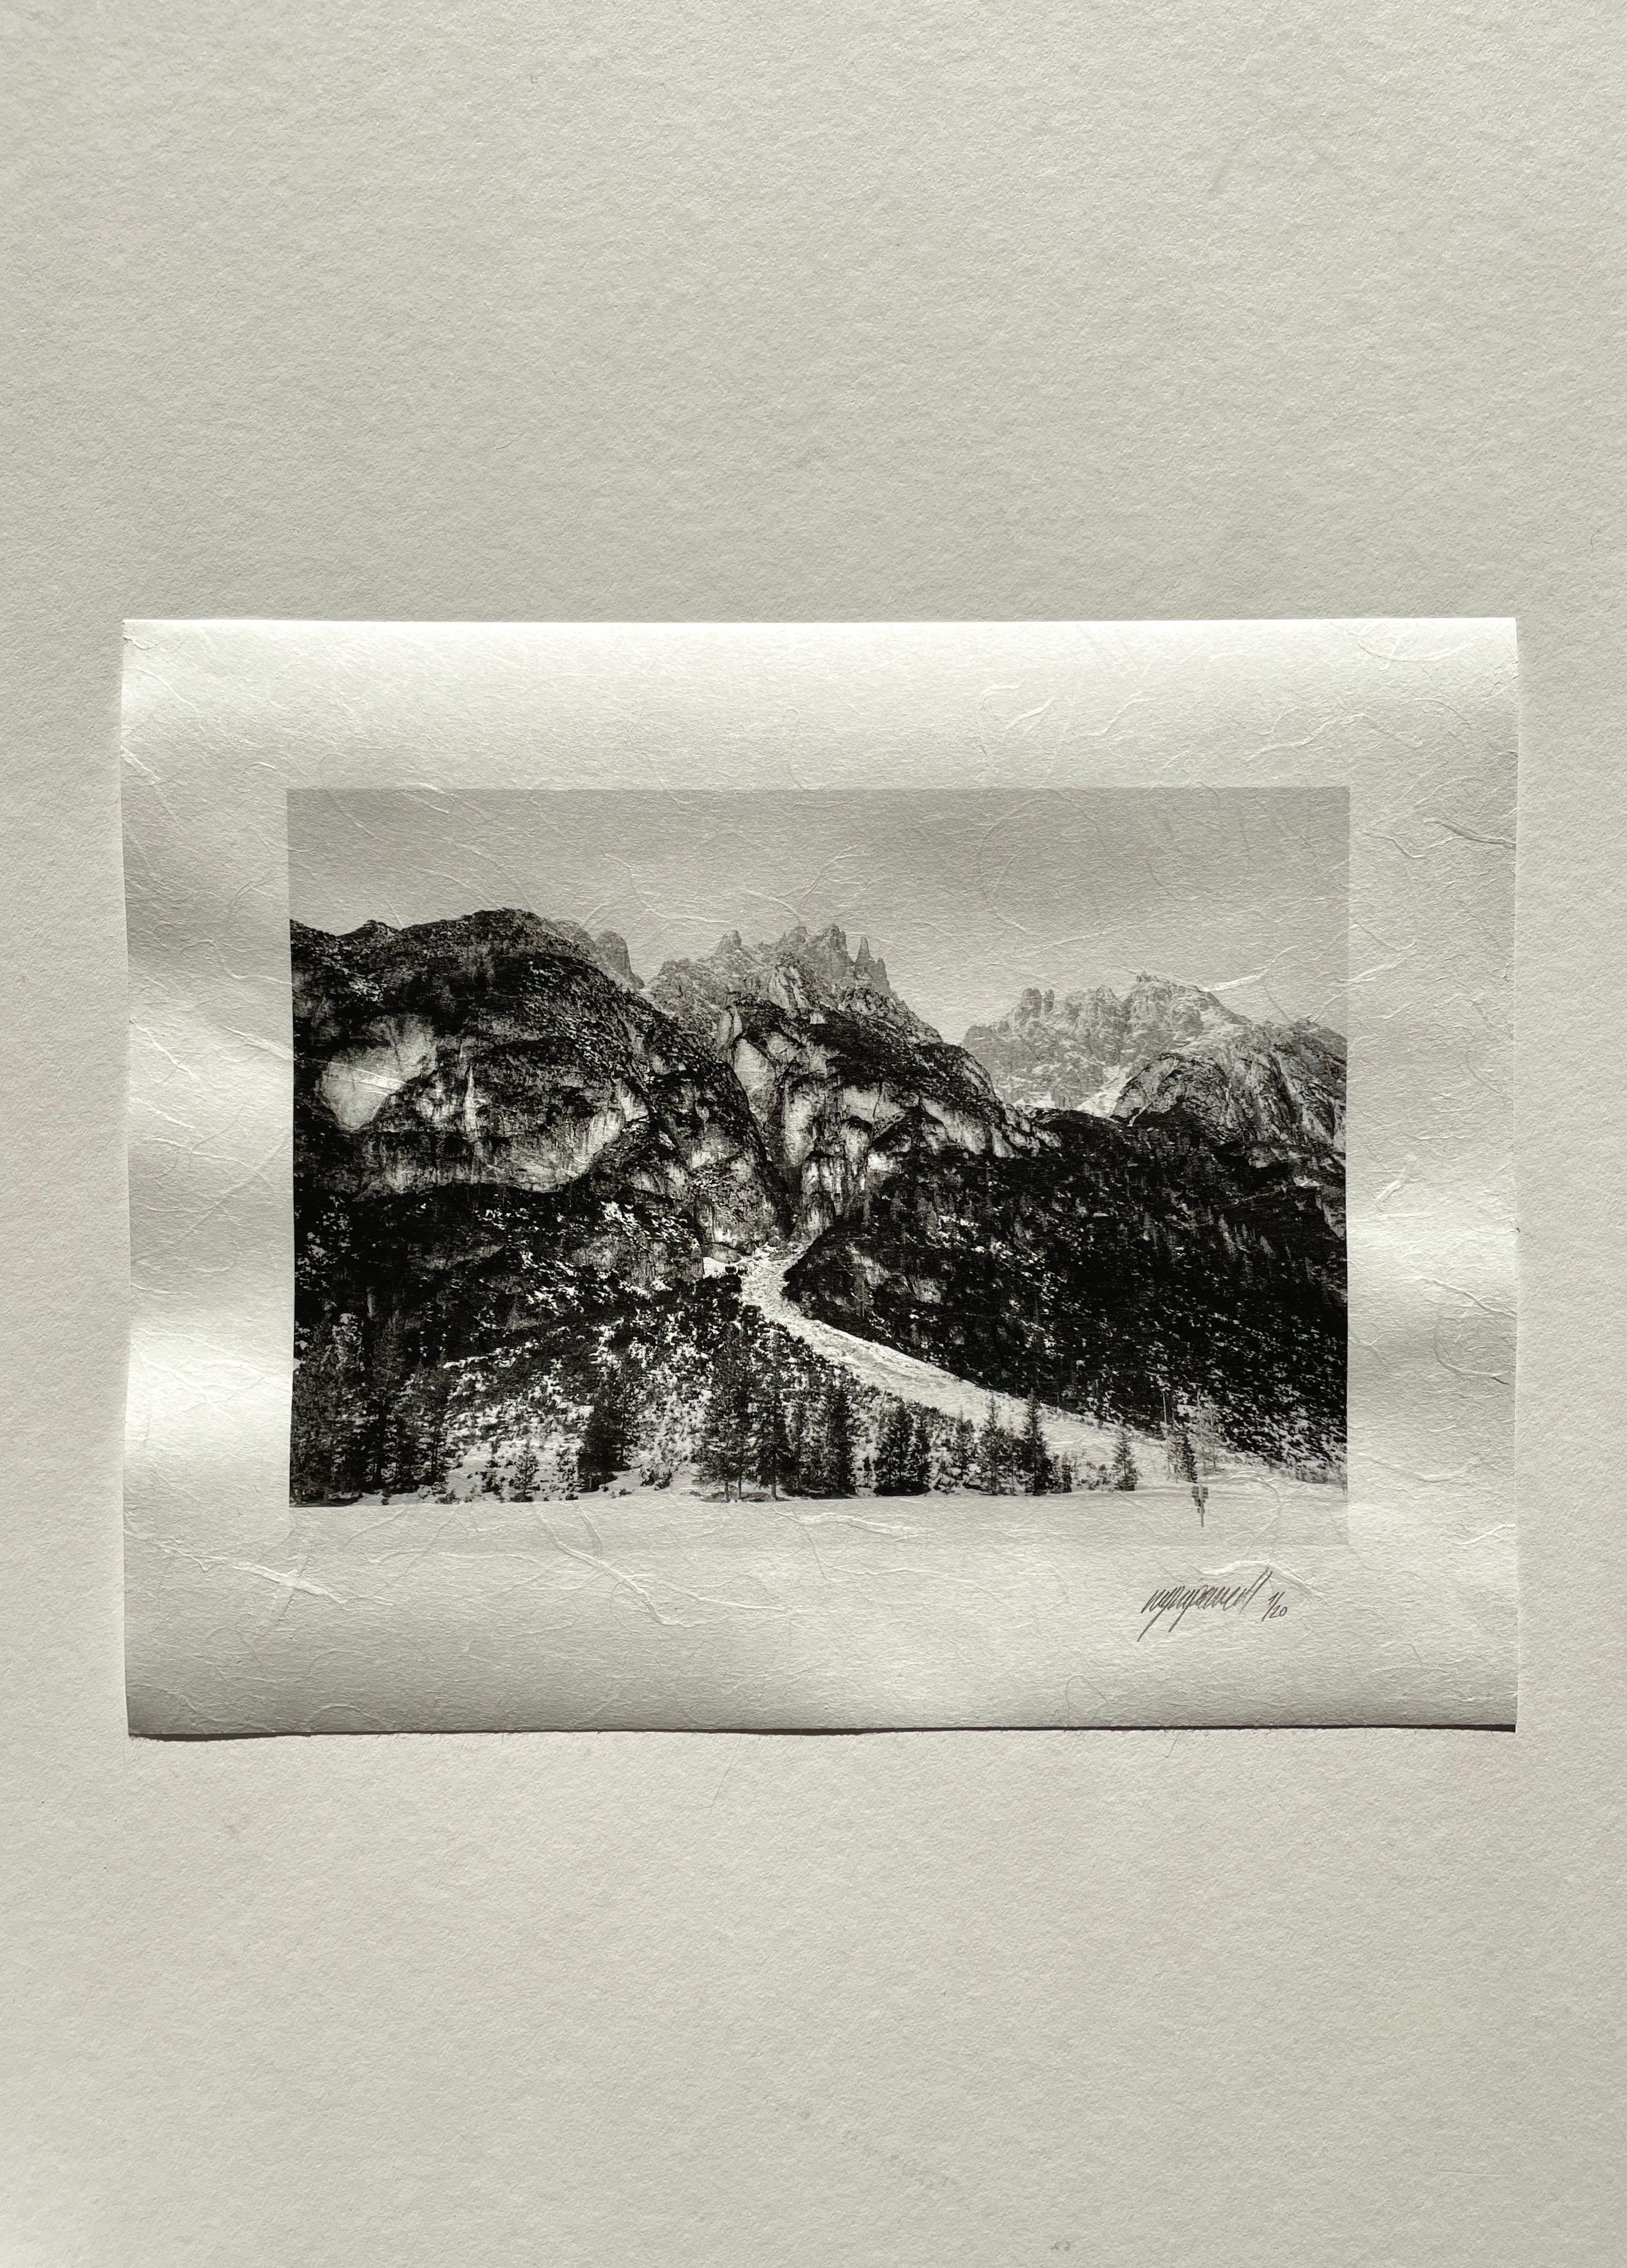 Dolomites No.3, 2024

It is a black and white film photograph of Dolomite mountains, made using a 4x5 Large format camera Linhof. Ugne Pouwell does all the processing and printing in the studio.

From a limited edition of 20.

Printed on Unryu Thin